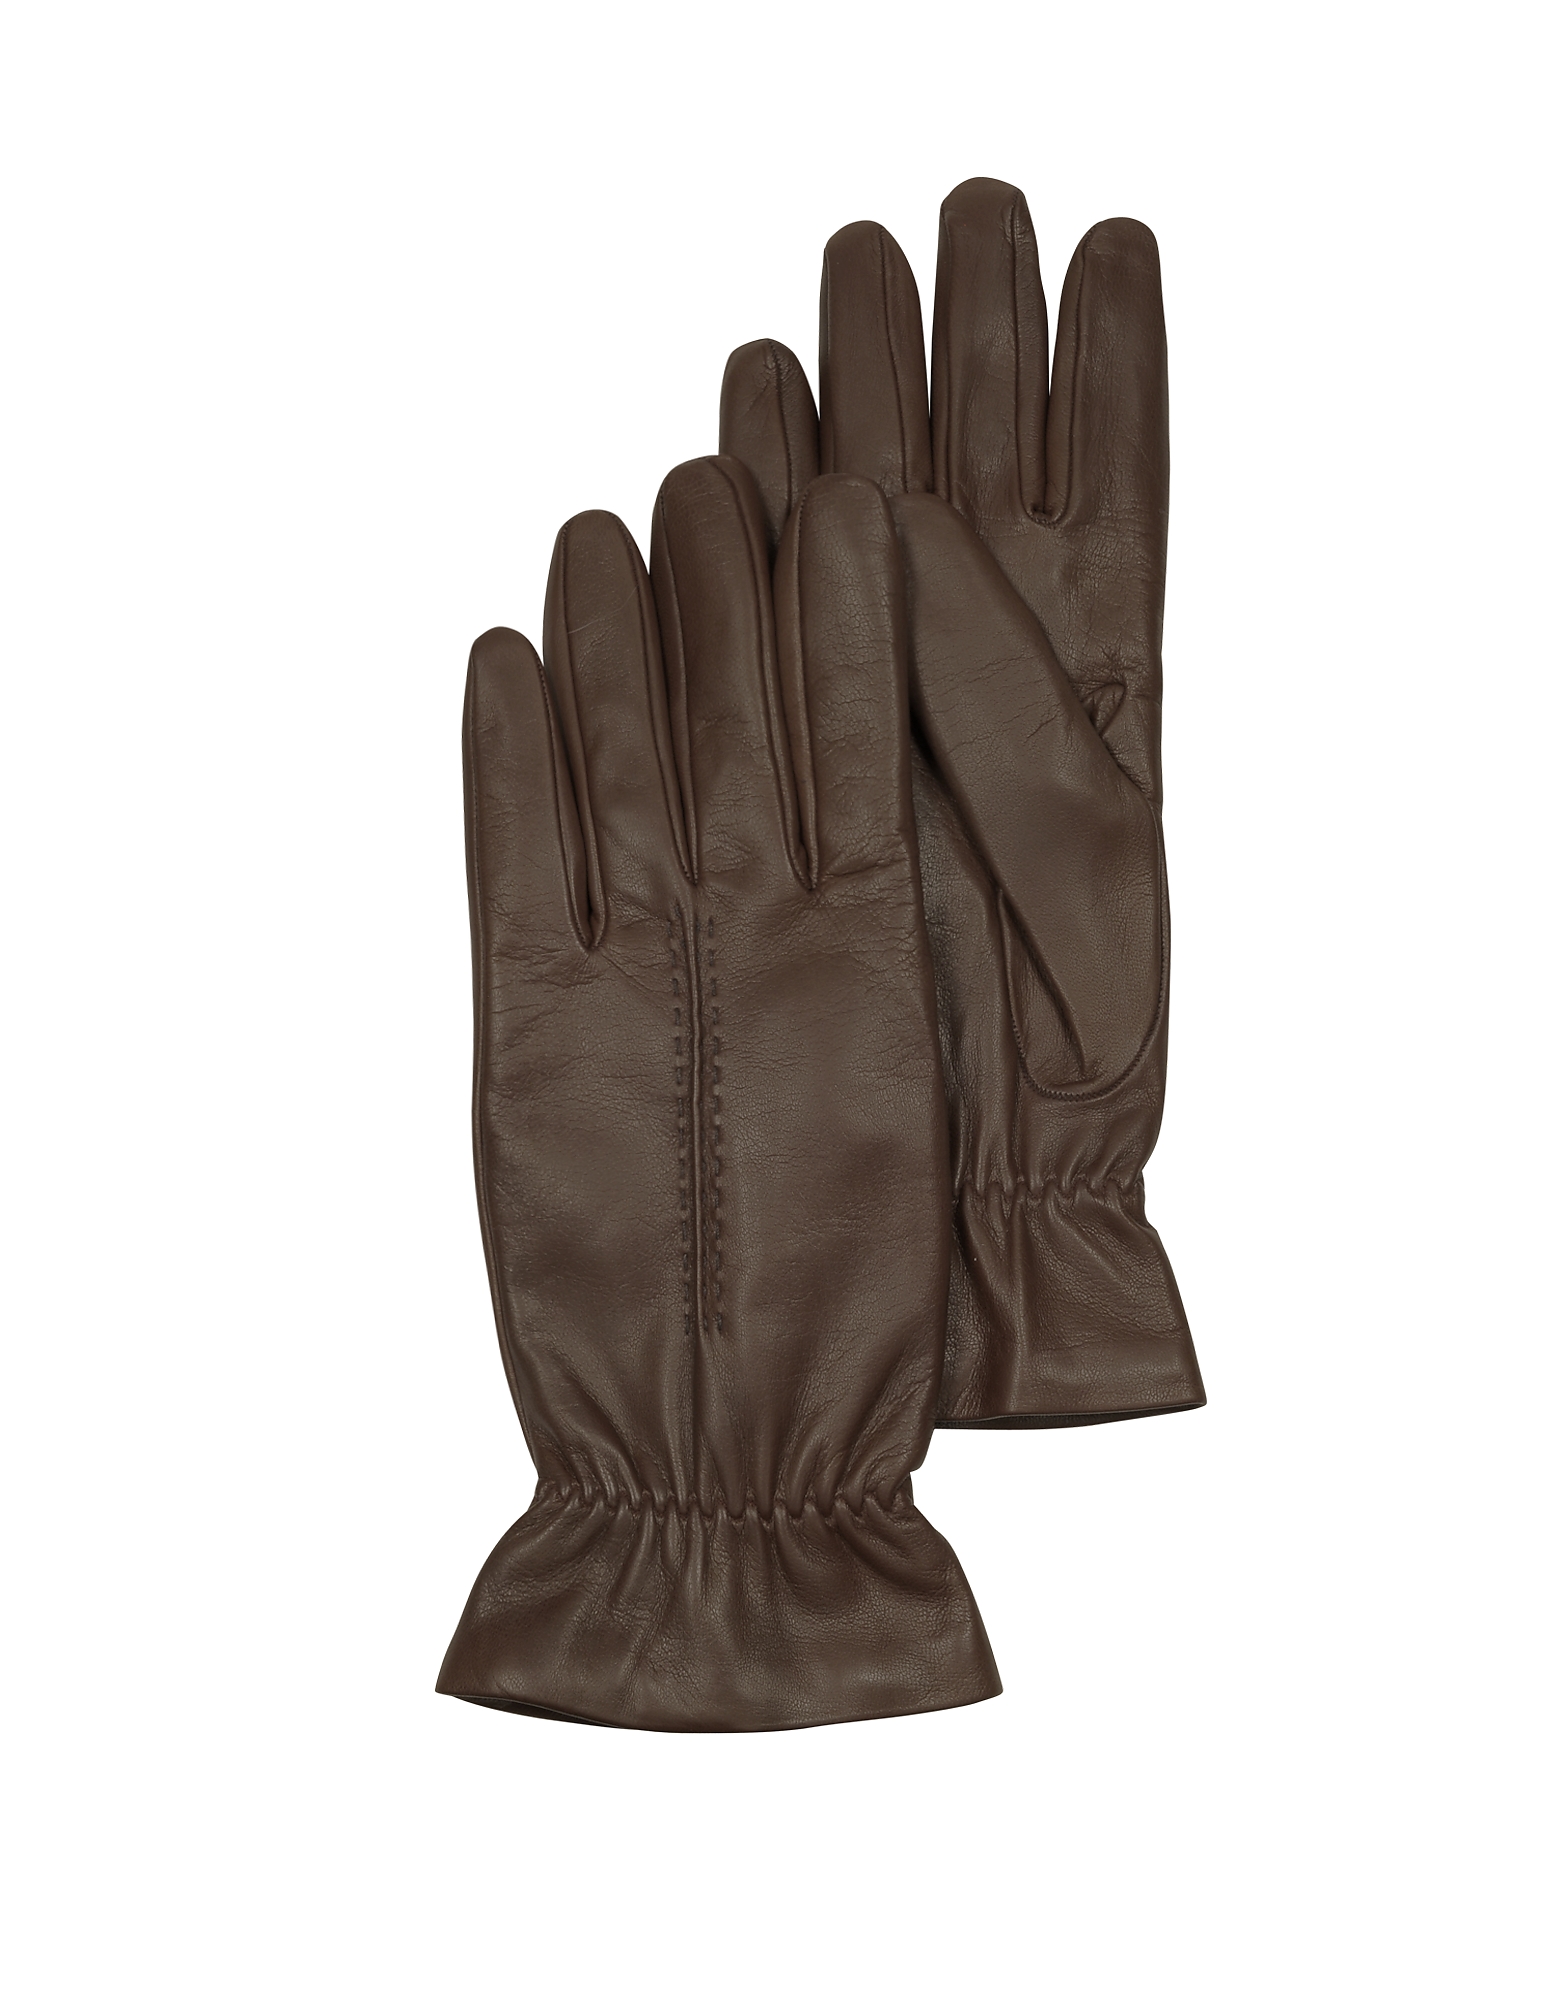 Forzieri Women's Gloves Chocolate Brown Leather Women's Gloves w/Wool Lining